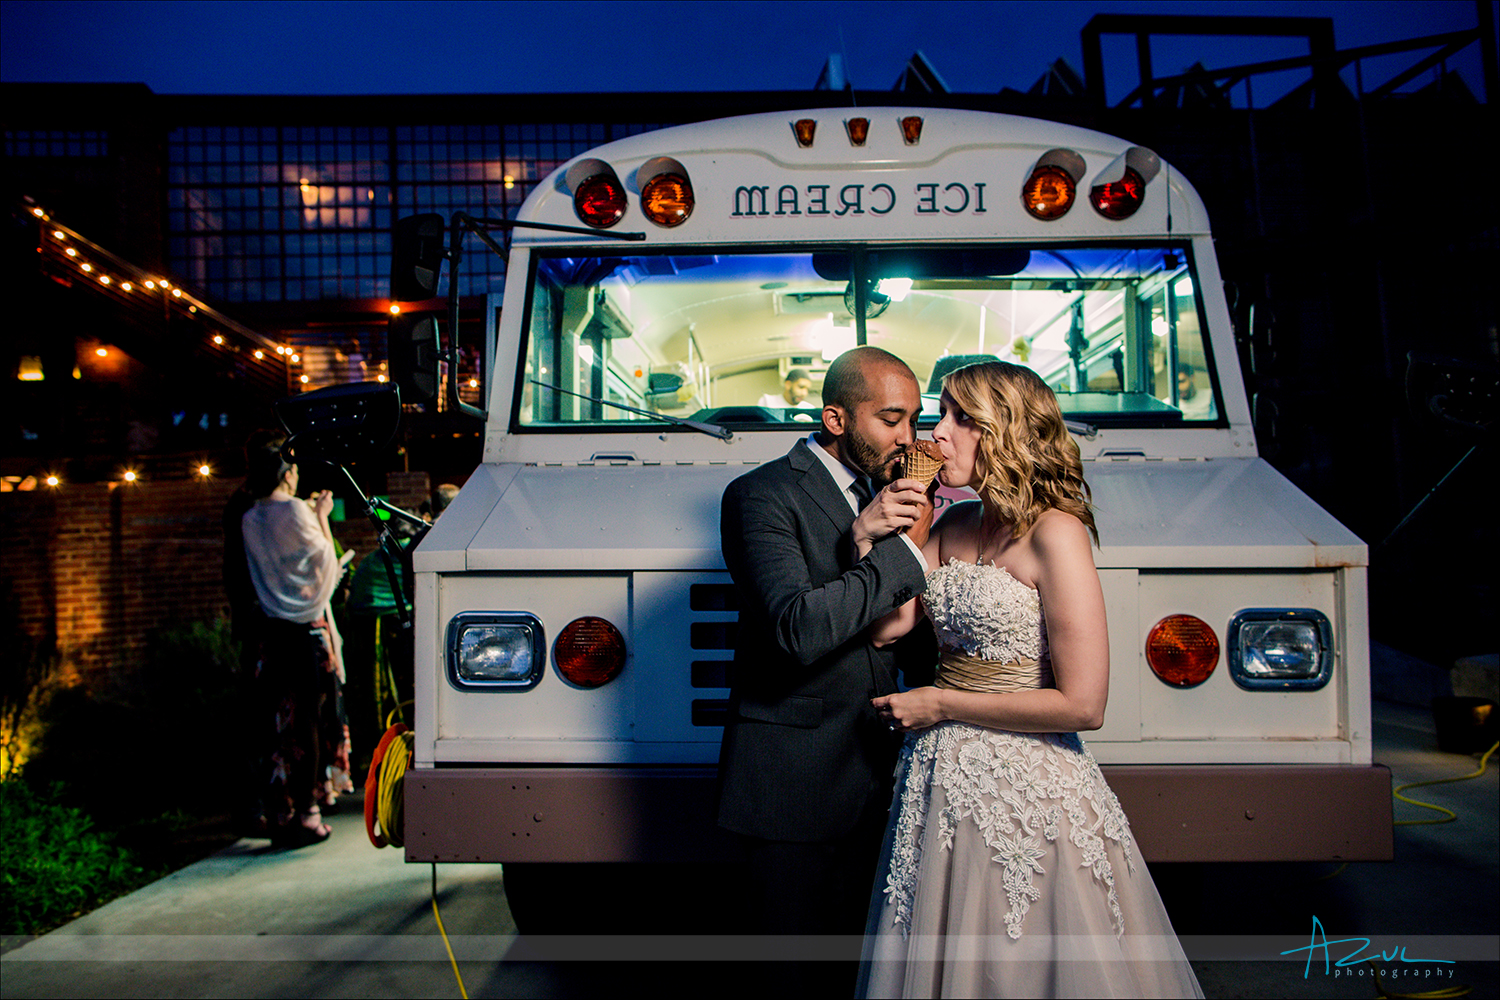 Photographer captures the wedding day couple sharing a toast with ice cream after the ceremony in Raleigh NC